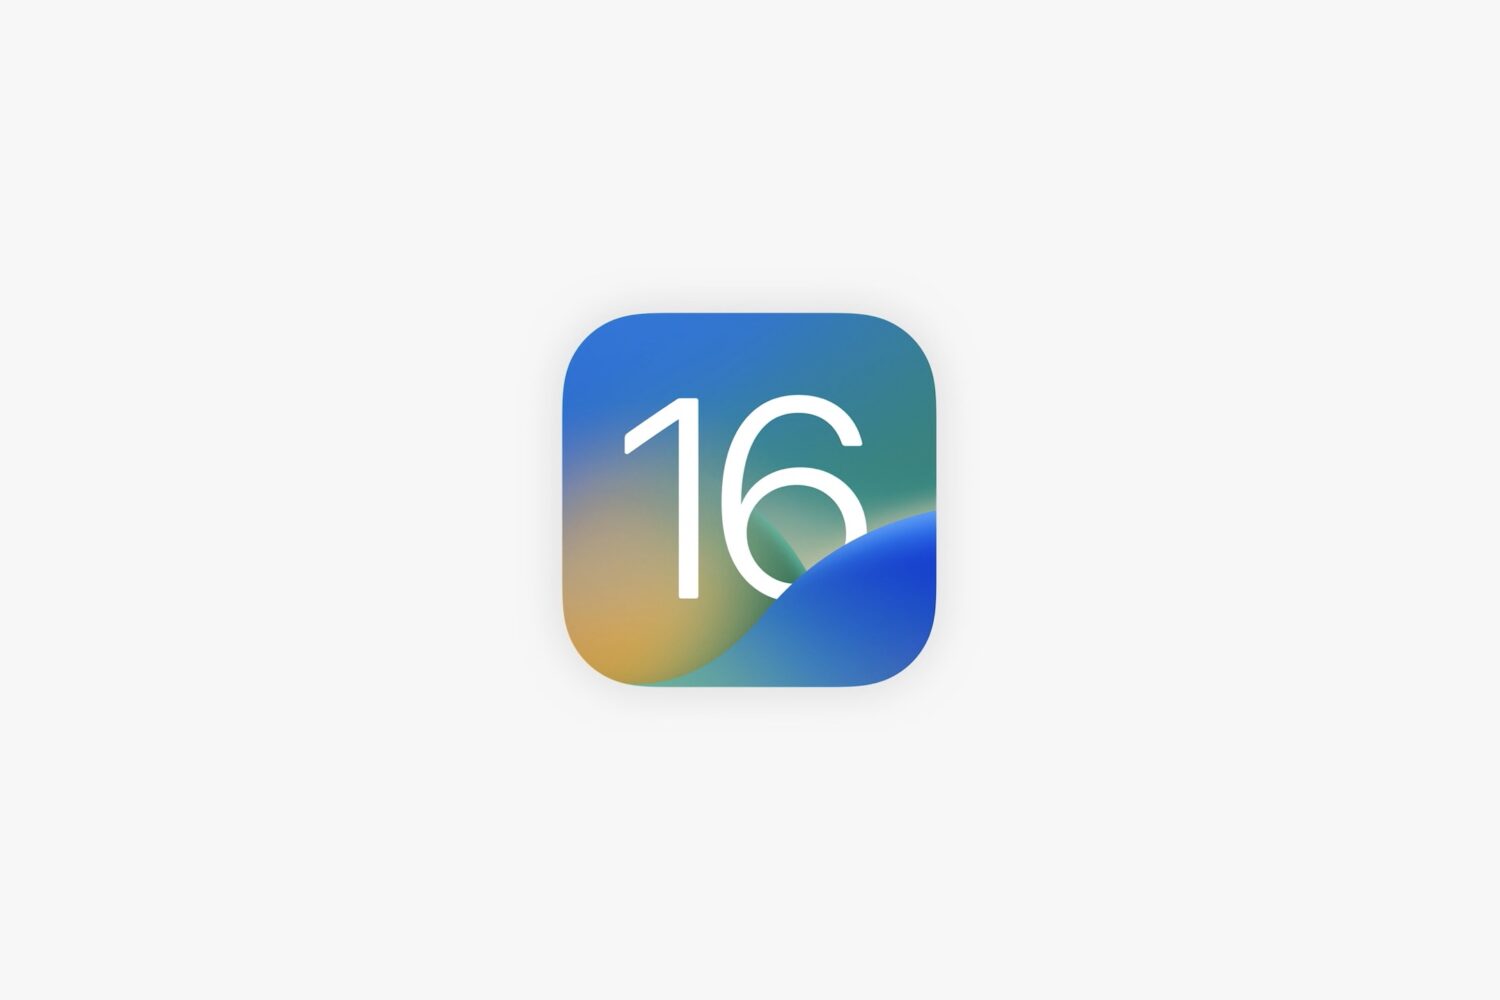 iOS 16 icon set against a solid light-gray background